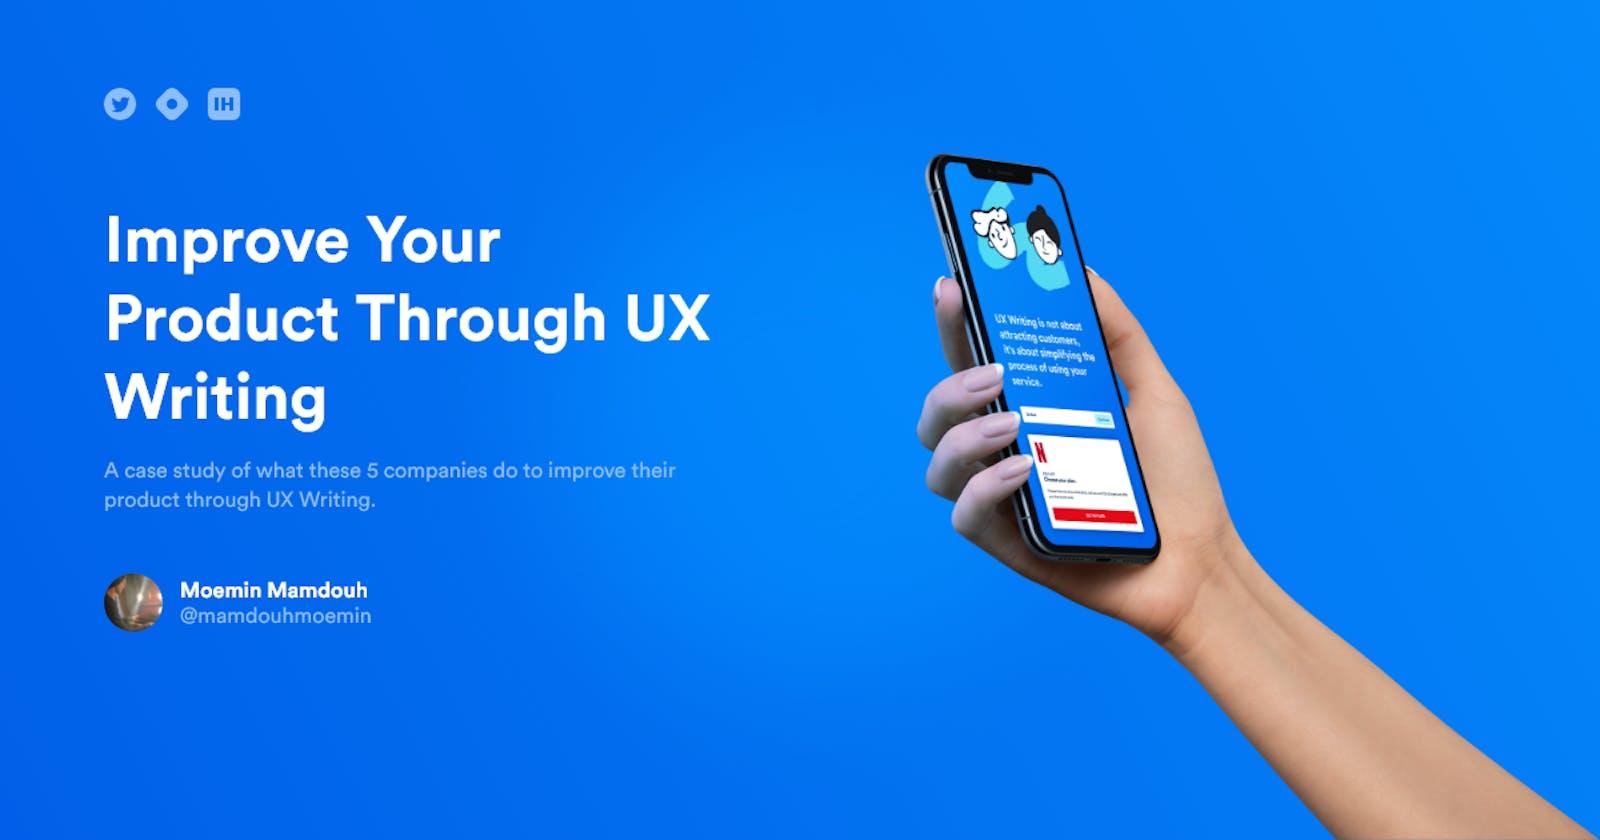 4 Companies That Improve Their Product Through UX Writing